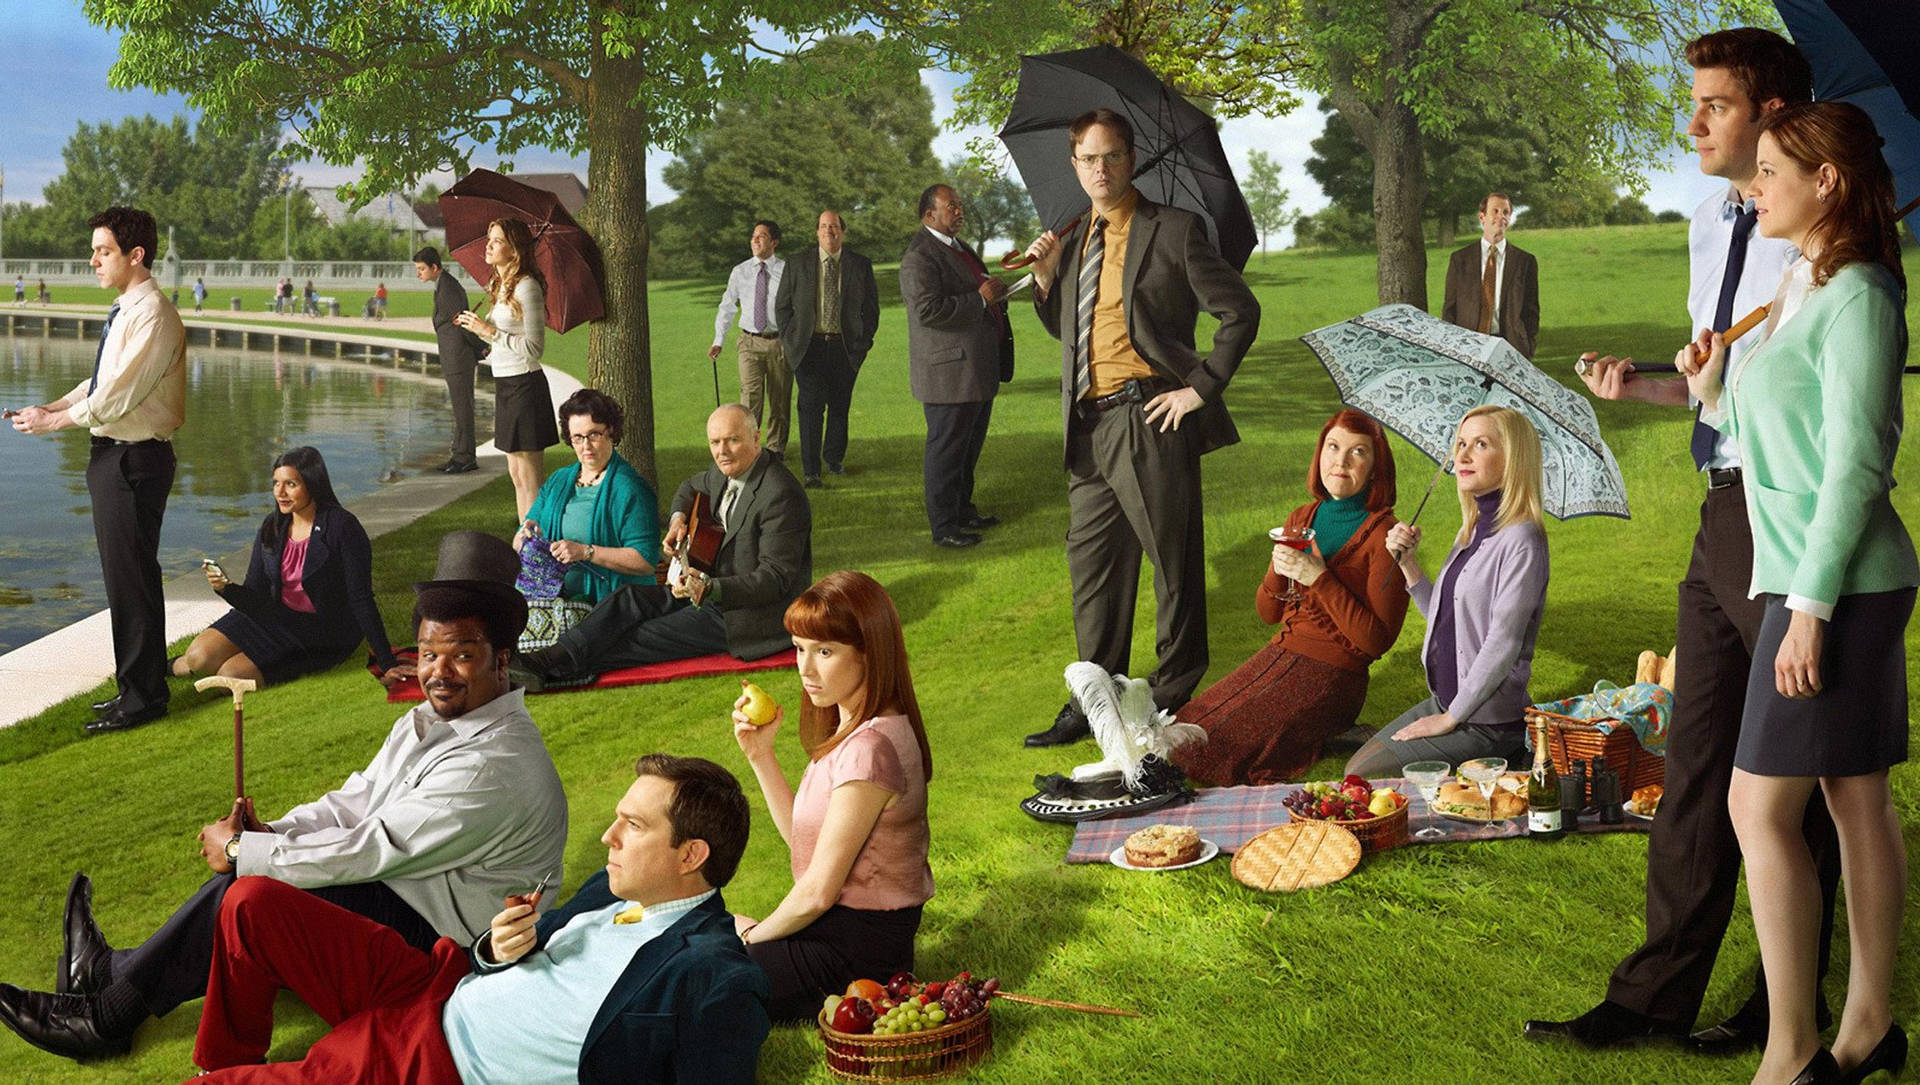 The Pam, Jim and Dwight enjoy a picnic for The Office season 8 Wallpaper